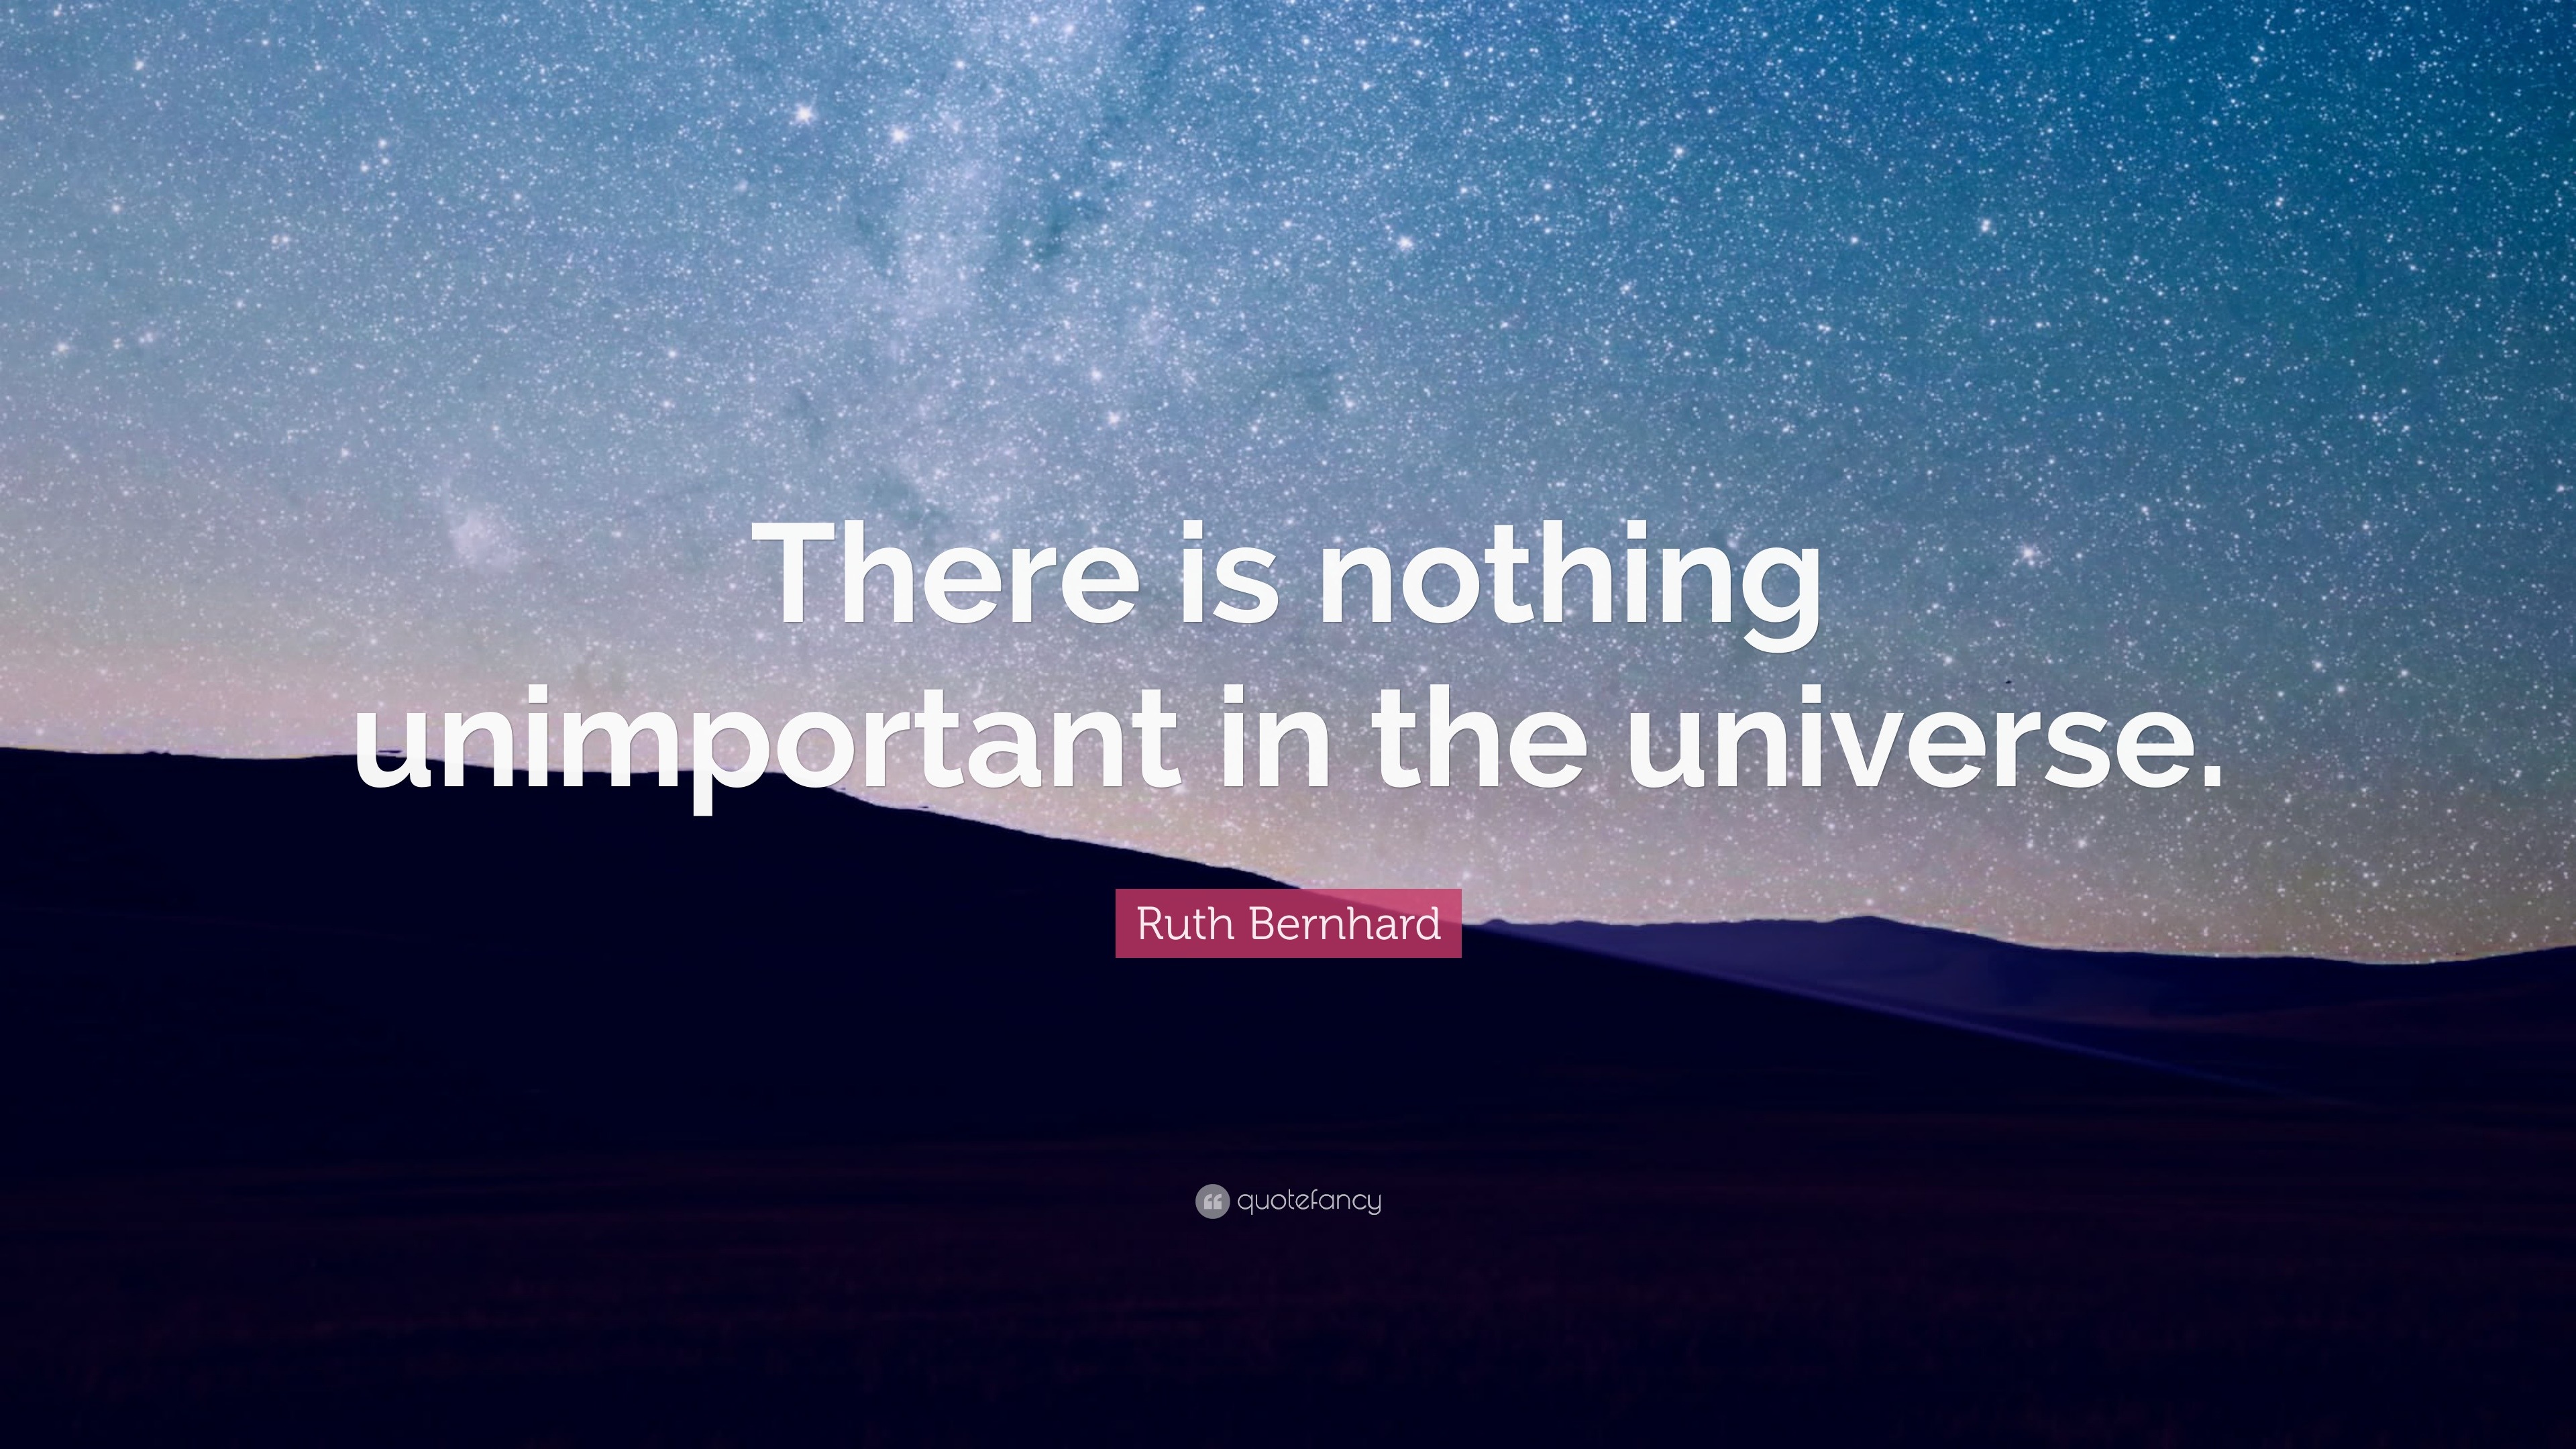 Ruth Bernhard Quote: “There is nothing unimportant in the universe.”